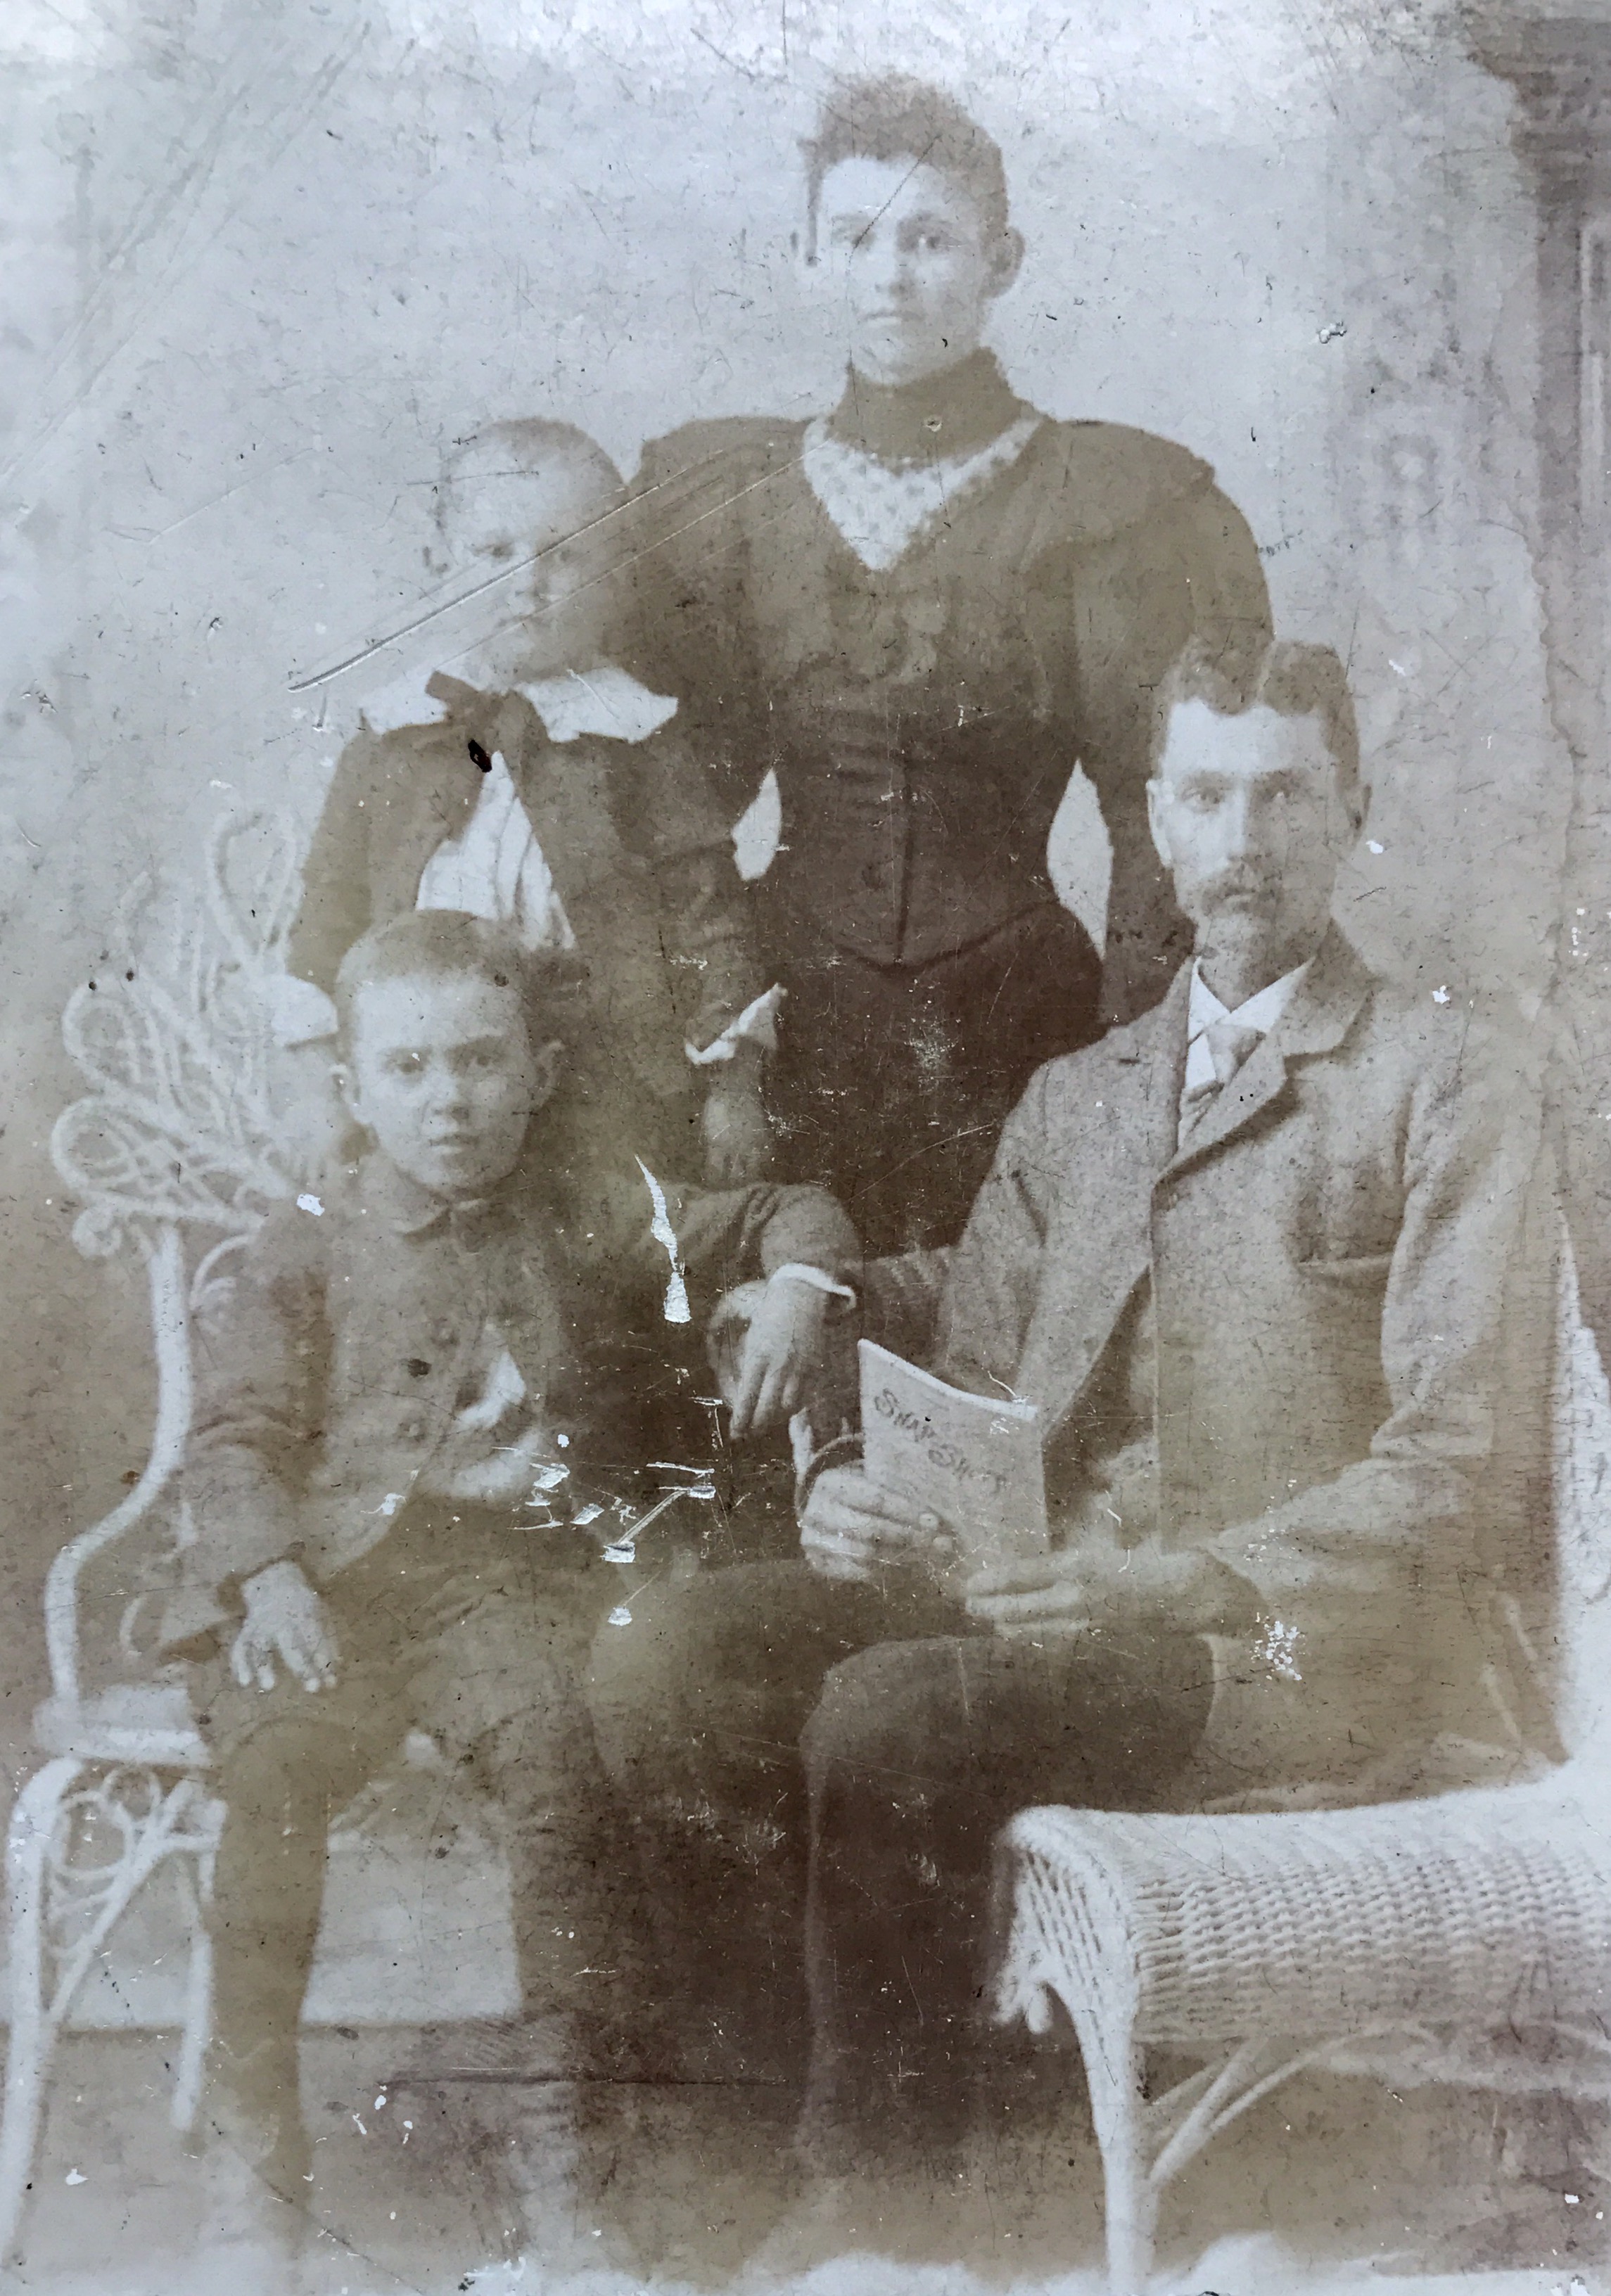 Albion Sherwood Wise with Wilma Elizabeth Adams and Luther (youngest) and Walter. Taken in 1893